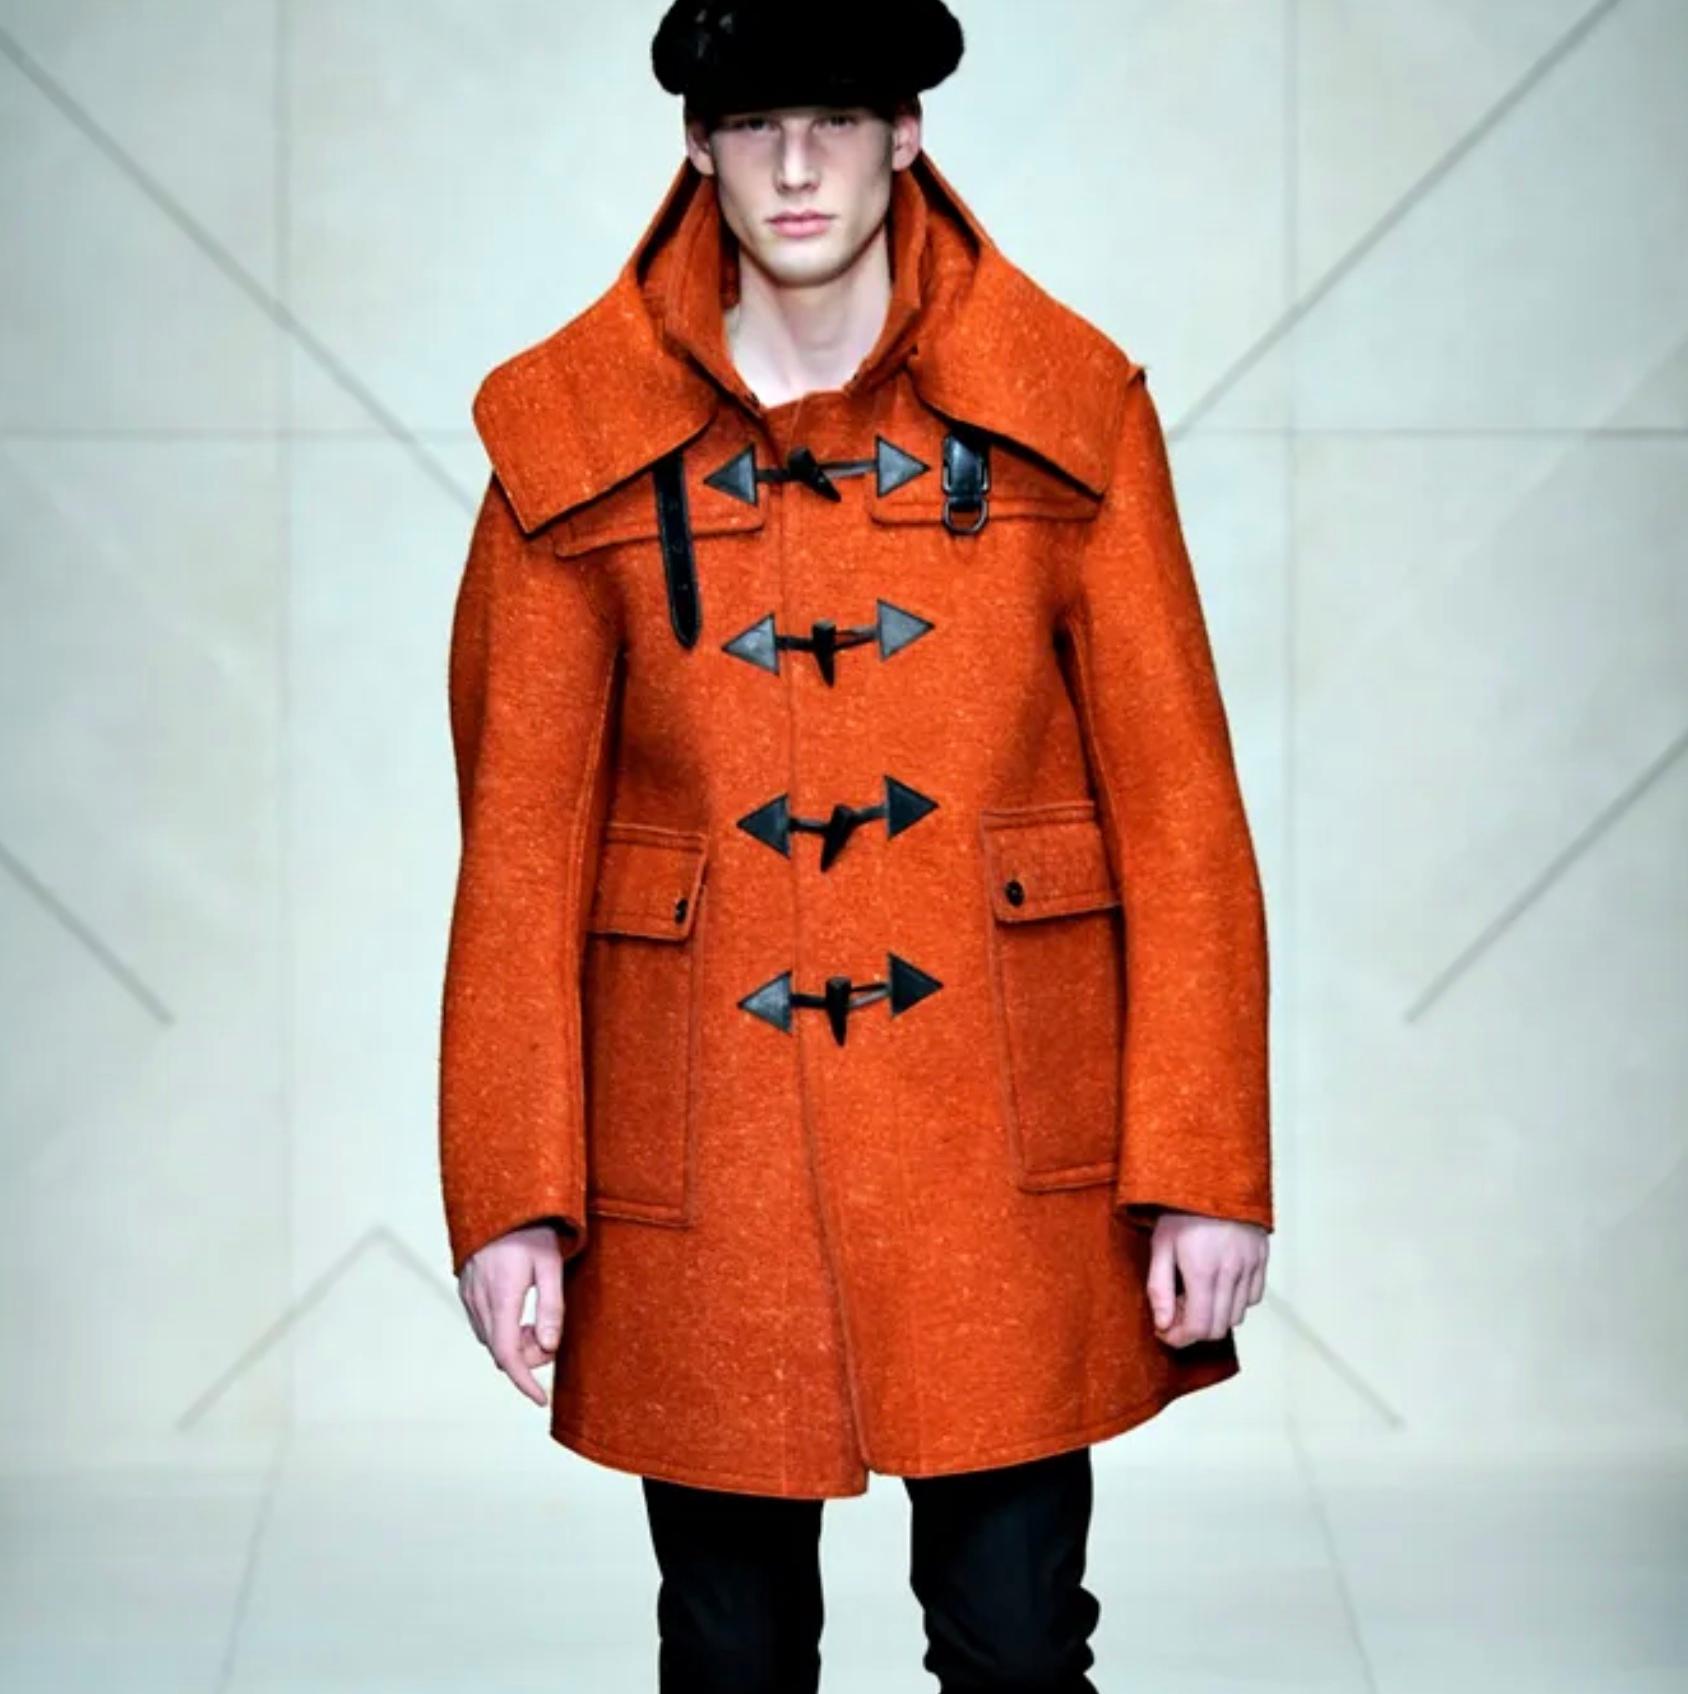 BURBERRY PRORSUM Fall-Winter 2011 coat comes in a orange heather wool featuring a detachable hood, leather trim, collar strap, front pockets, back belt, hook & loop detail, and a toggle closure. Made in Italy.

Very Good Pre-Owned Condition.
Marked: